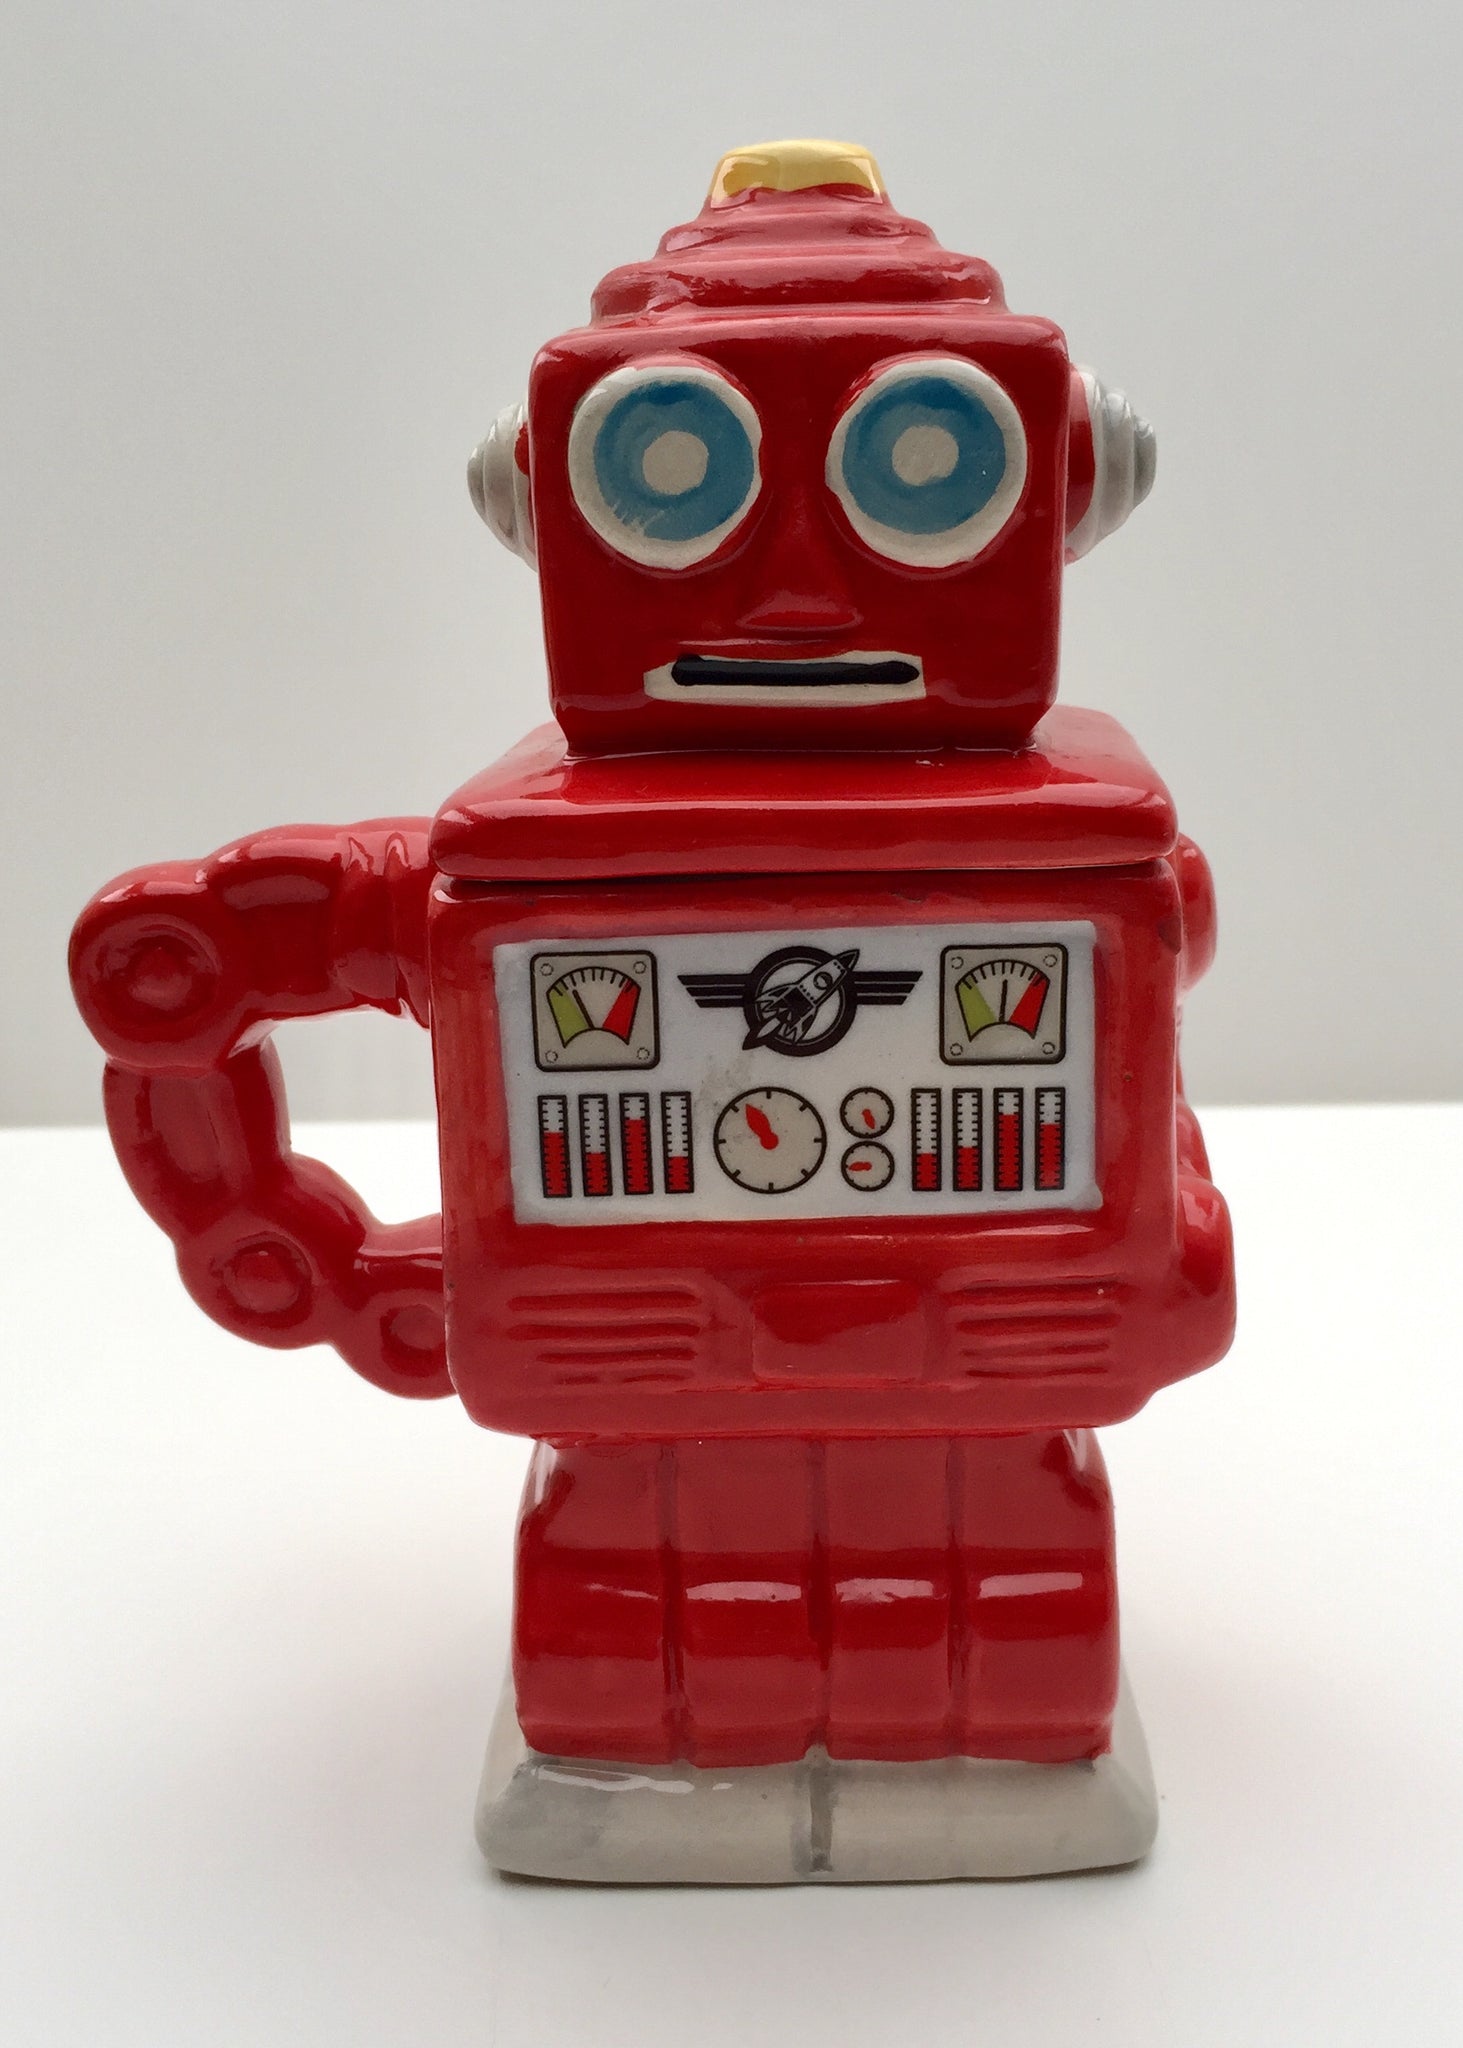 Robot in red colourway, different methinks